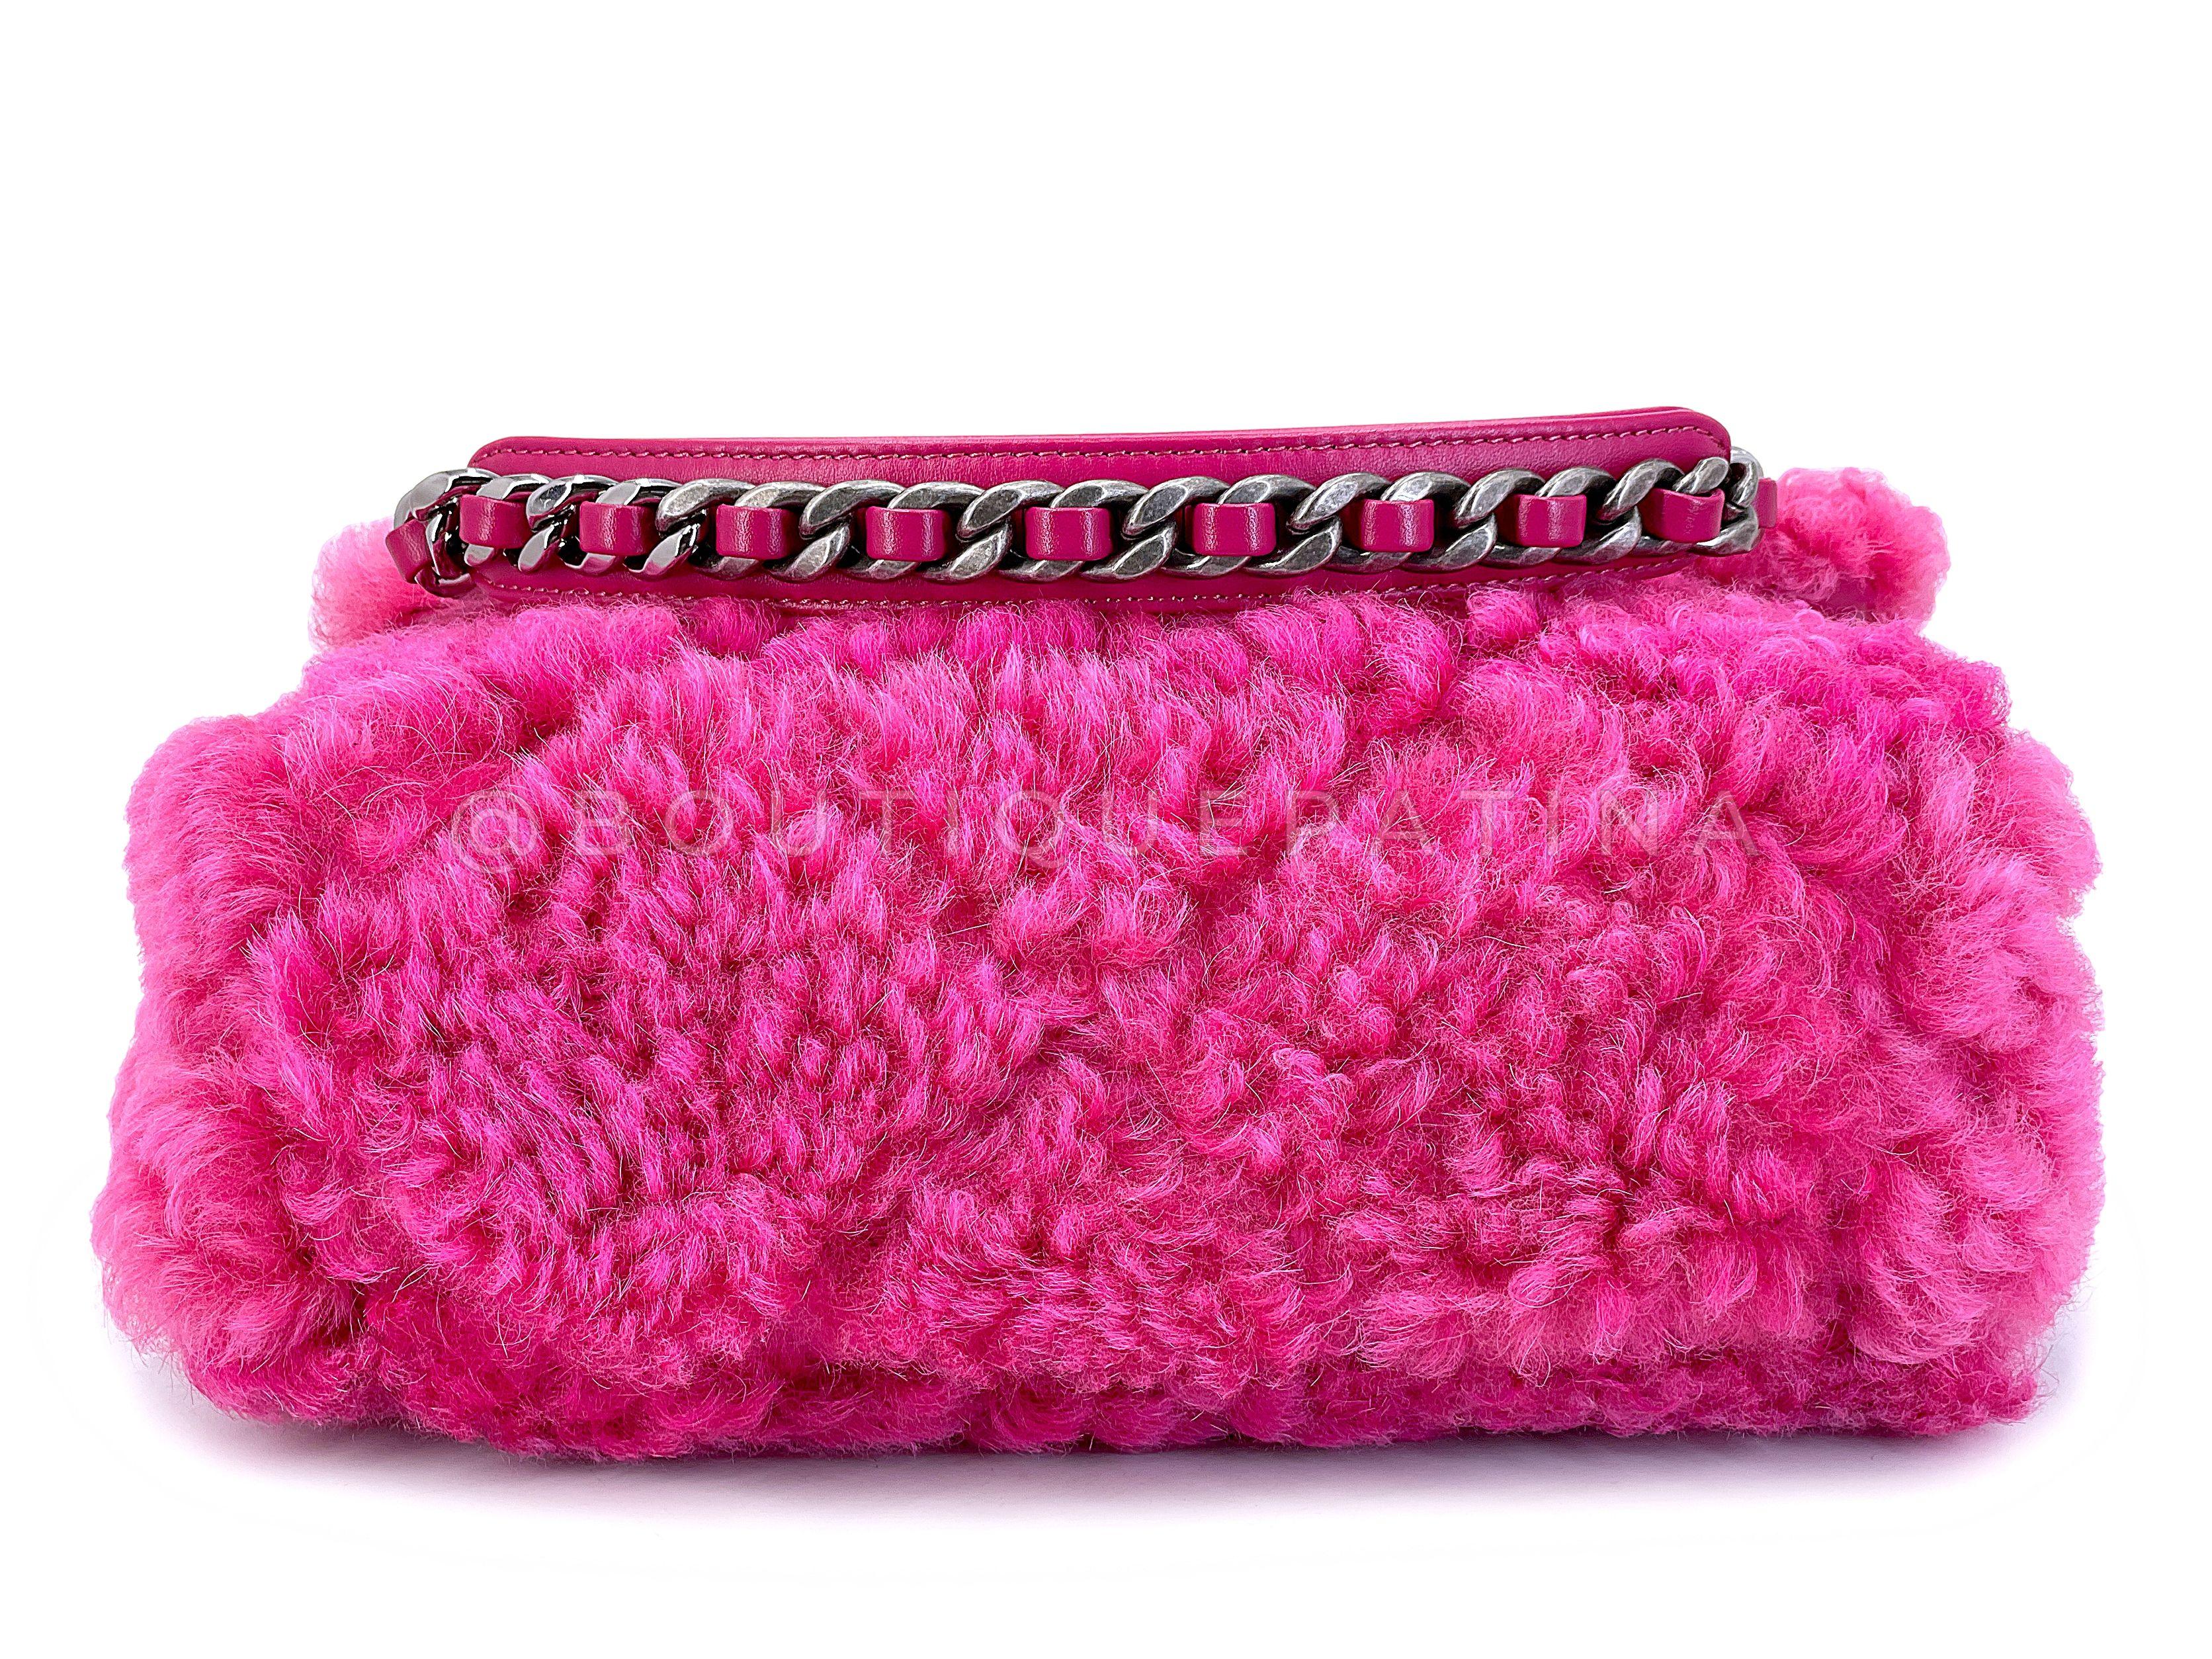 Chanel 19 Pink Shearling Fur Small Medium Flap Bag 67786 For Sale 1